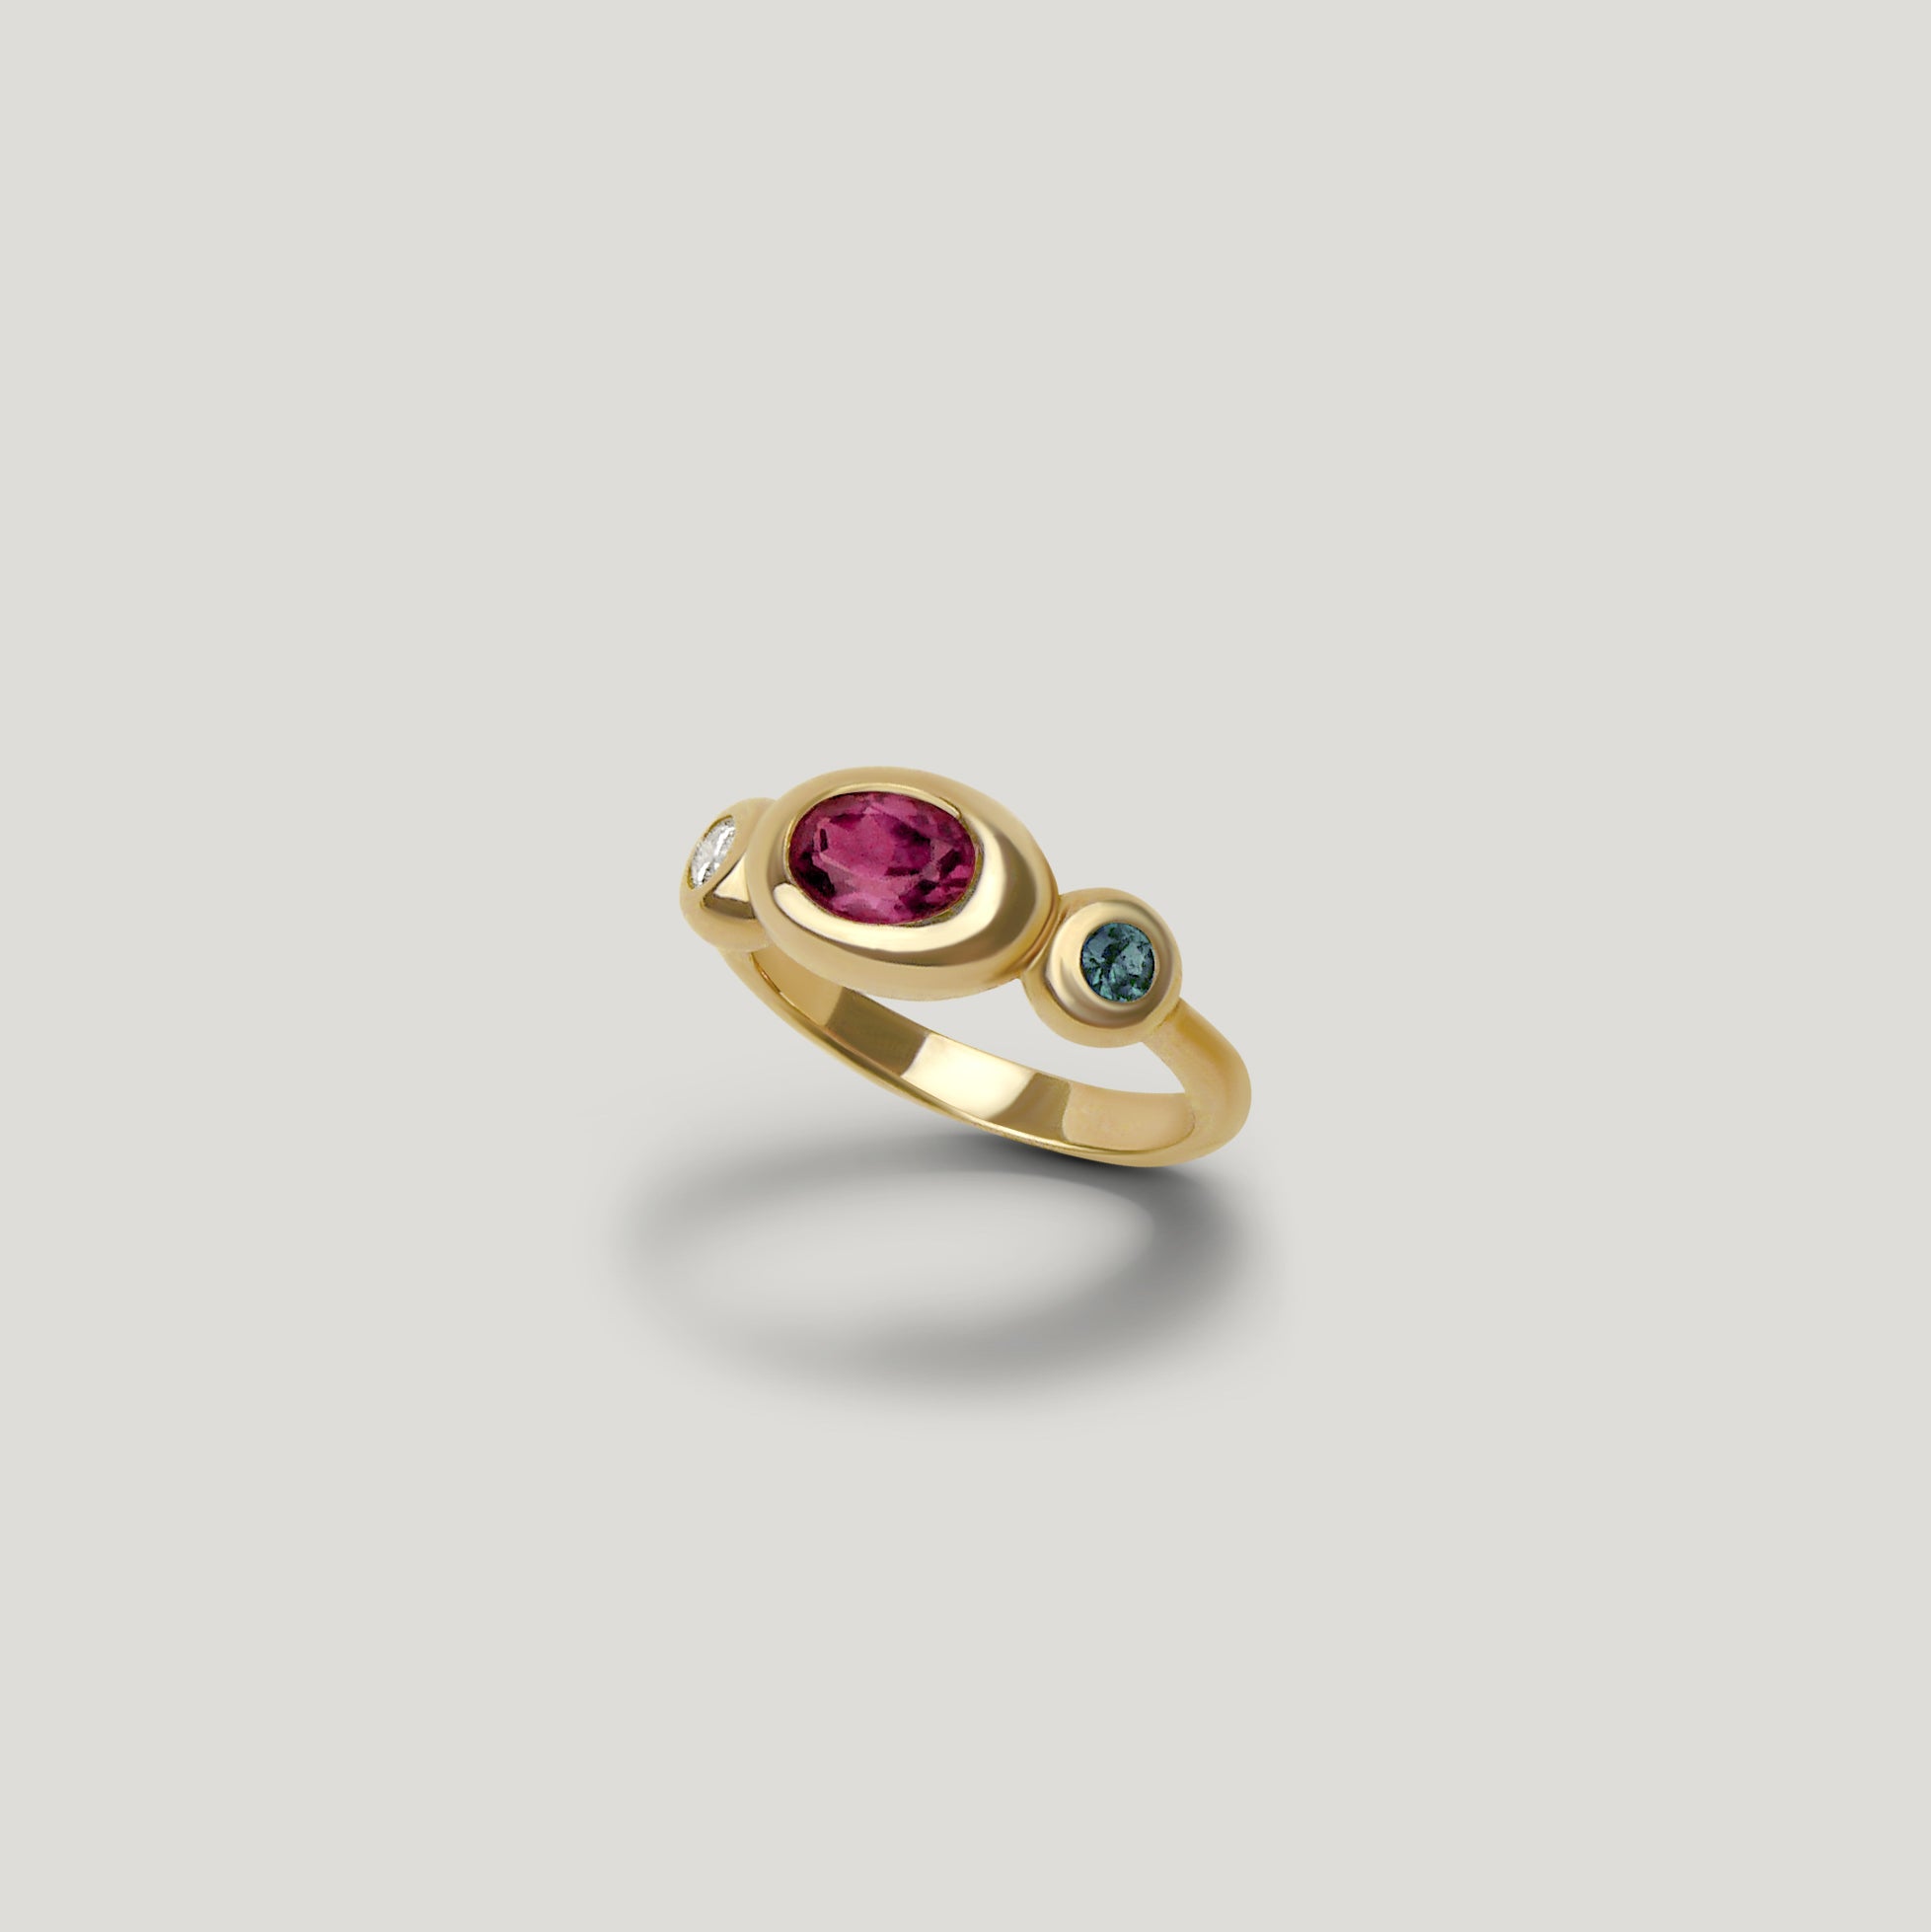 Foundation Trio Ring with garnet, teal sapphire, and diamond bezel set on a half round gold band